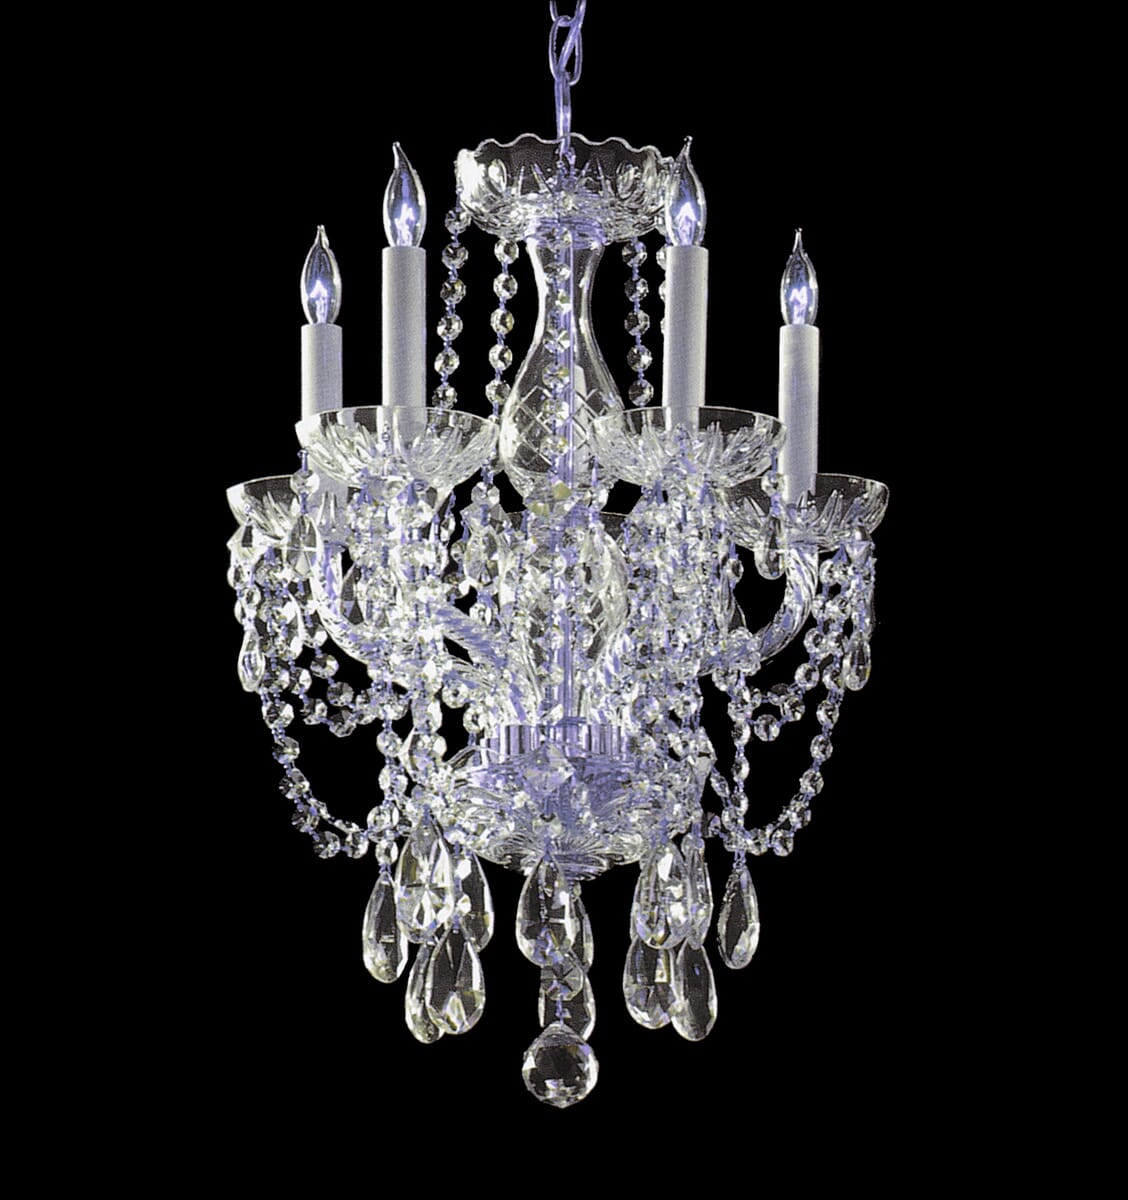 Traditional Crystal 5-Light 20"" Mini Chandelier in Polished Chrome with Clear Swarovski Strass Crystals -  Crystorama, 1129-CH-CL-S